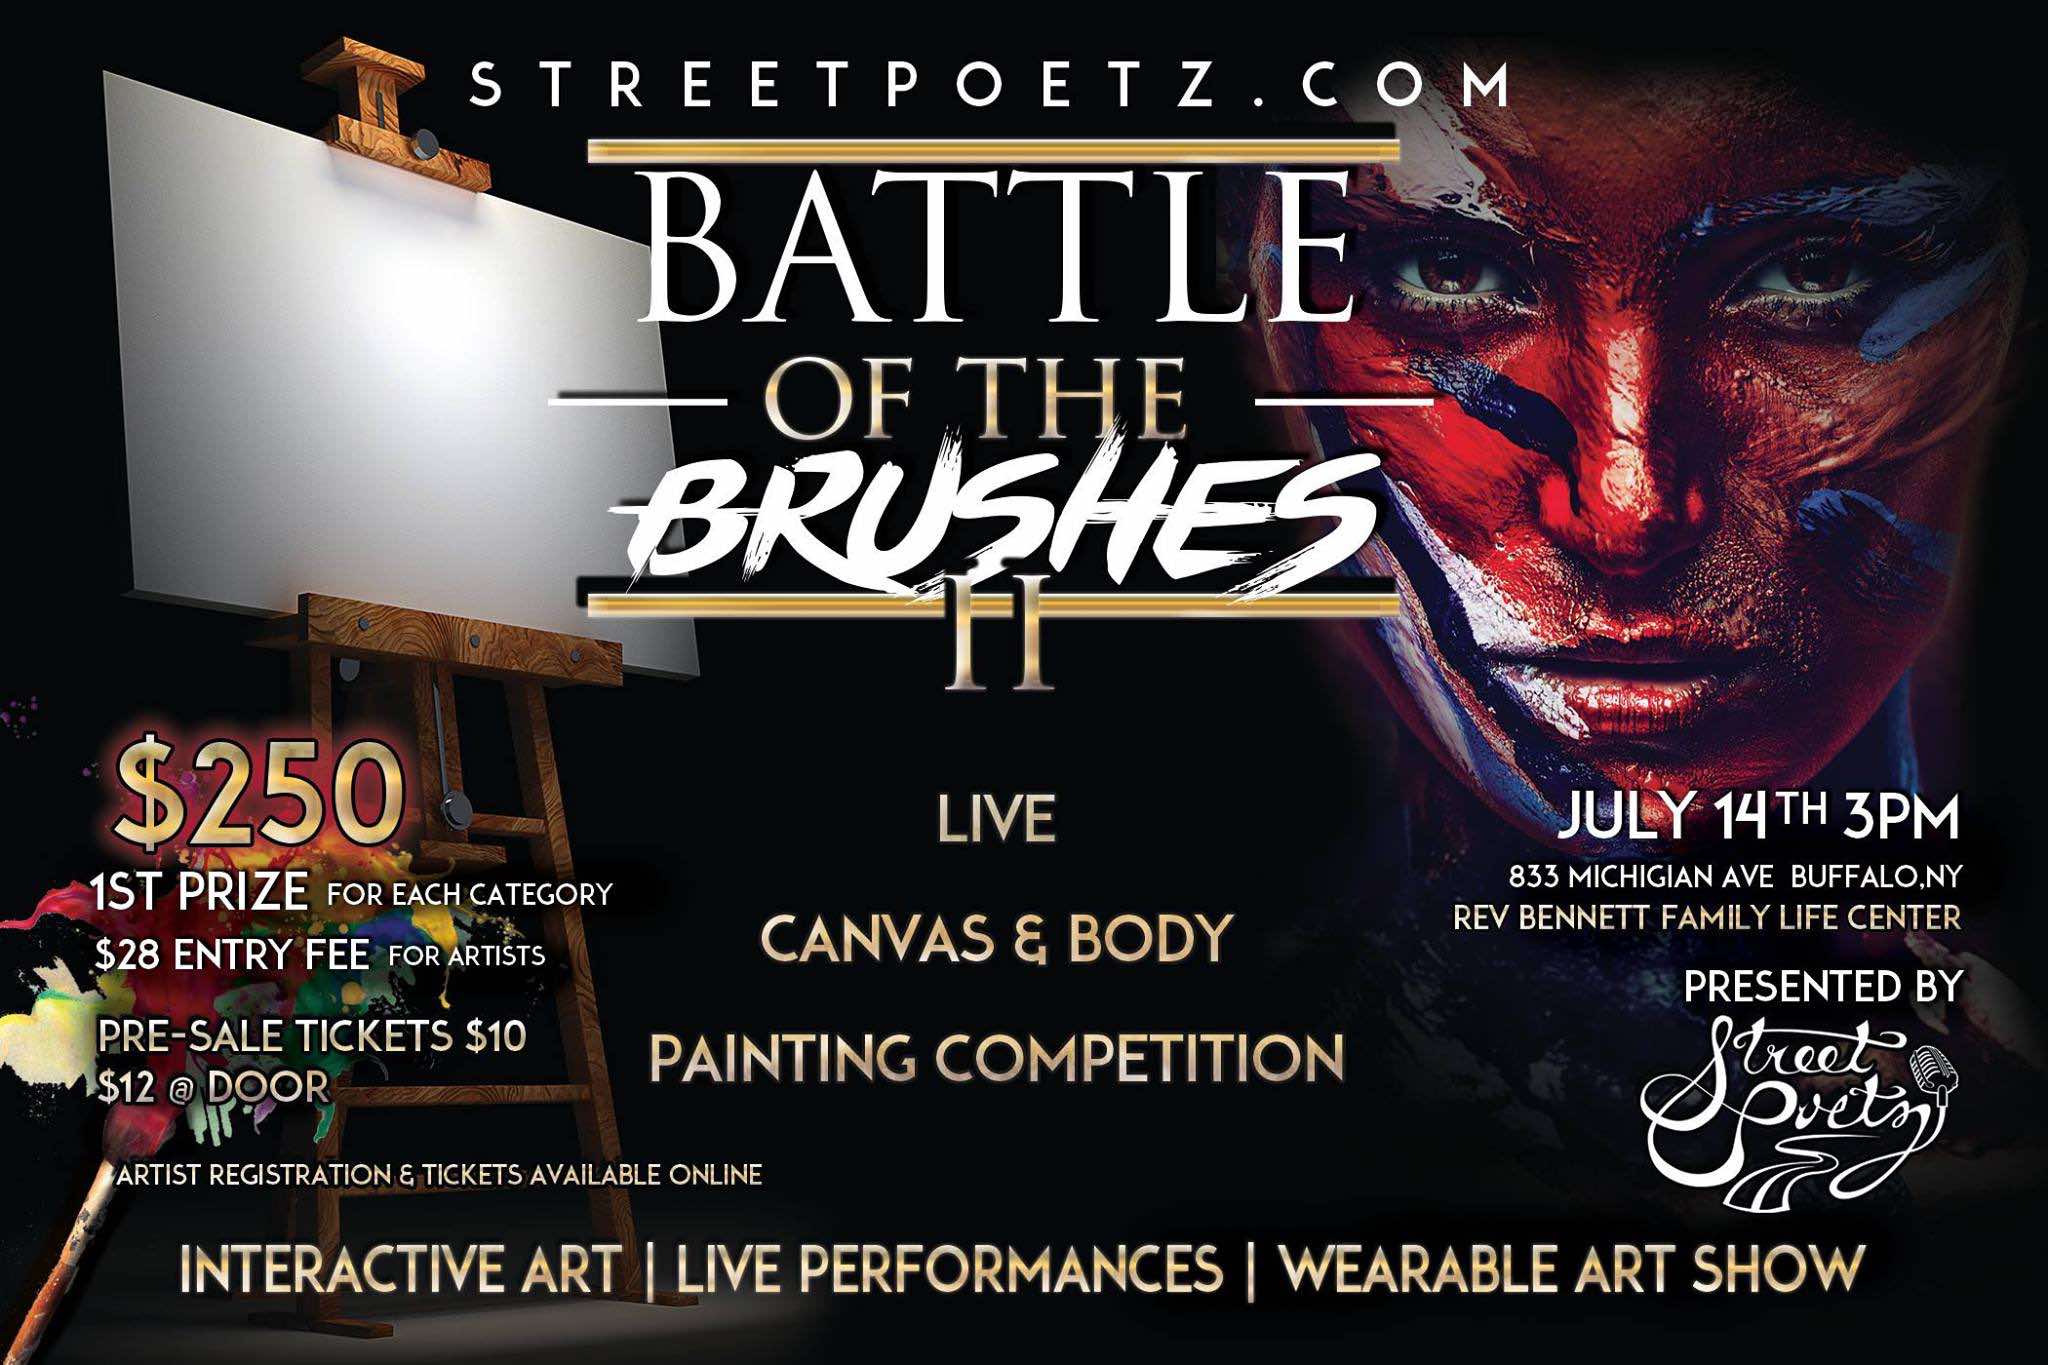 Battle of the Brushes!